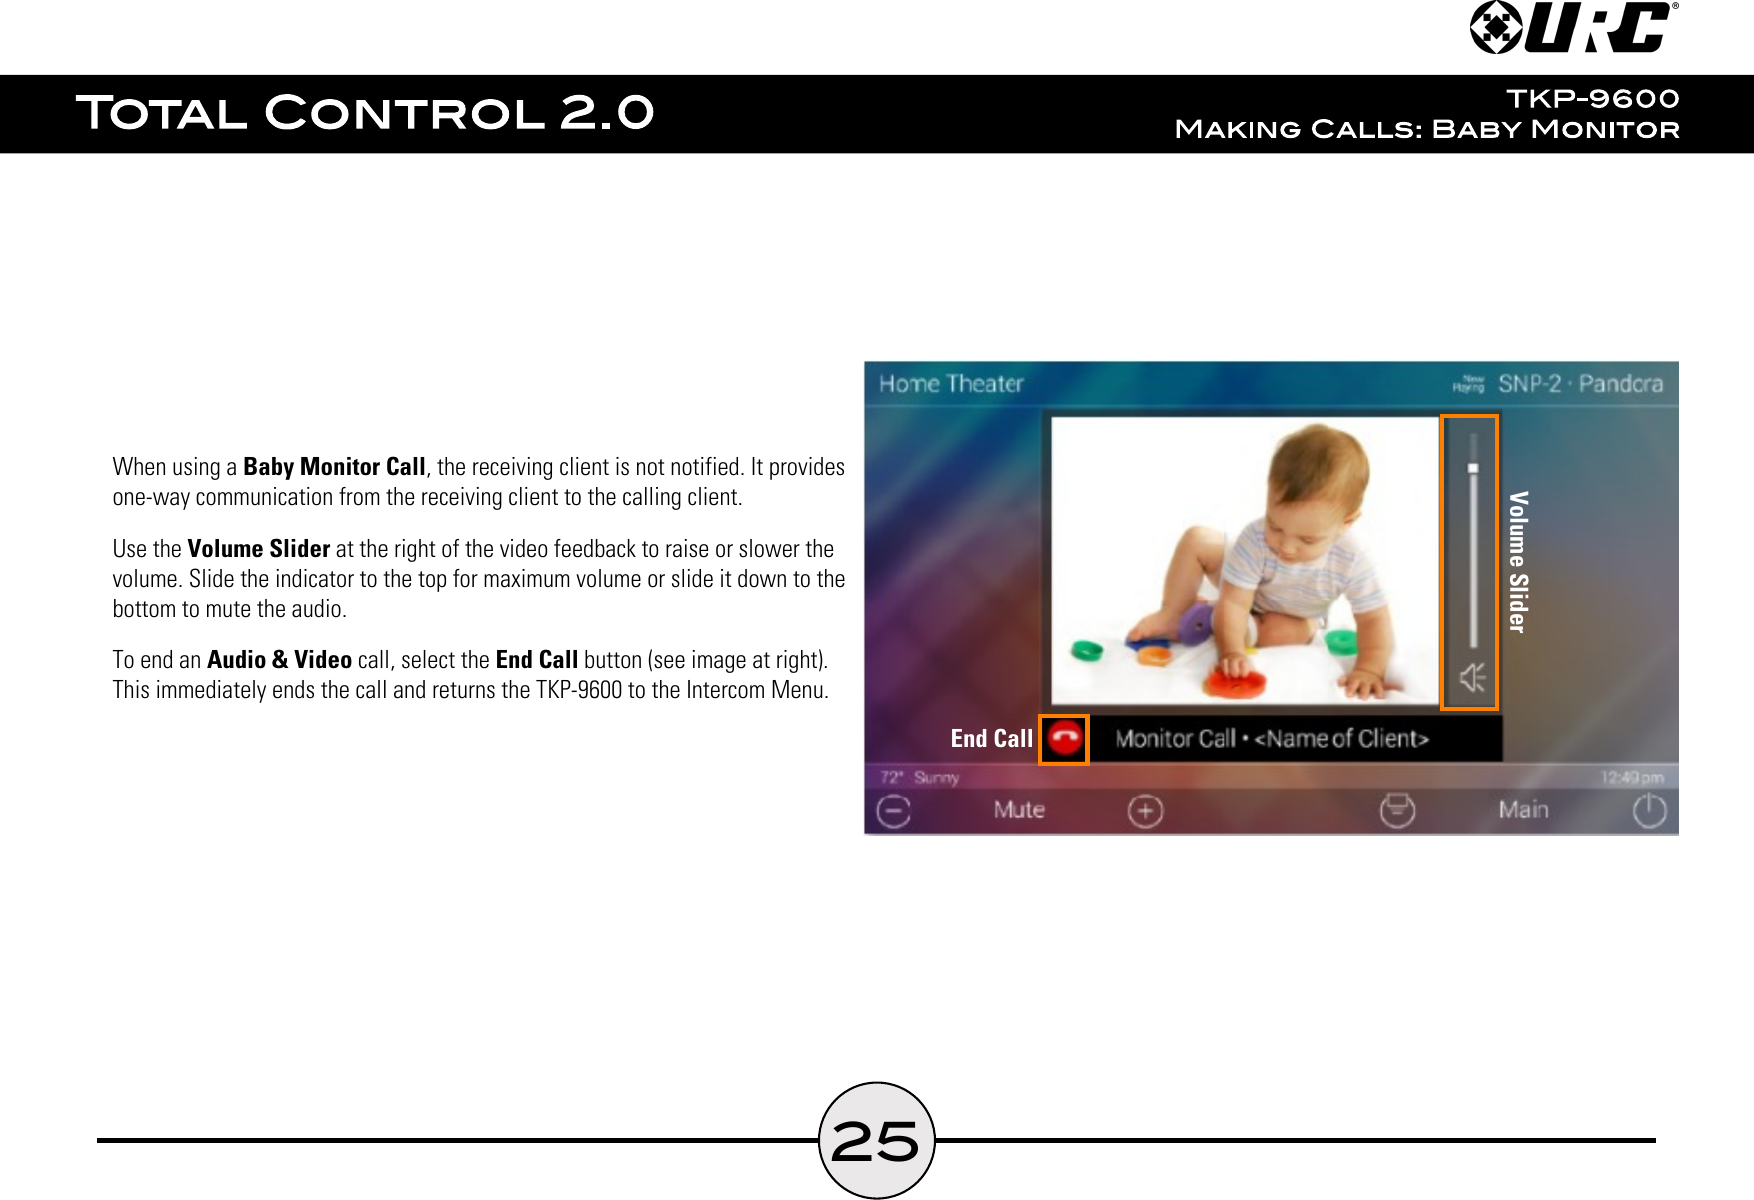 25When using a Baby Monitor Call, the receiving client is not notified. It providesone-way communication from the receiving client to the calling client.Use the Volume Slider at the right of the video feedback to raise or slower thevolume. Slide the indicator to the top for maximum volume or slide it down to thebottom to mute the audio.To end an Audio &amp; Video call, select the End Call button (see image at right).This immediately ends the call and returns the TKP-9600 to the Intercom Menu.Volume SliderEnd Call